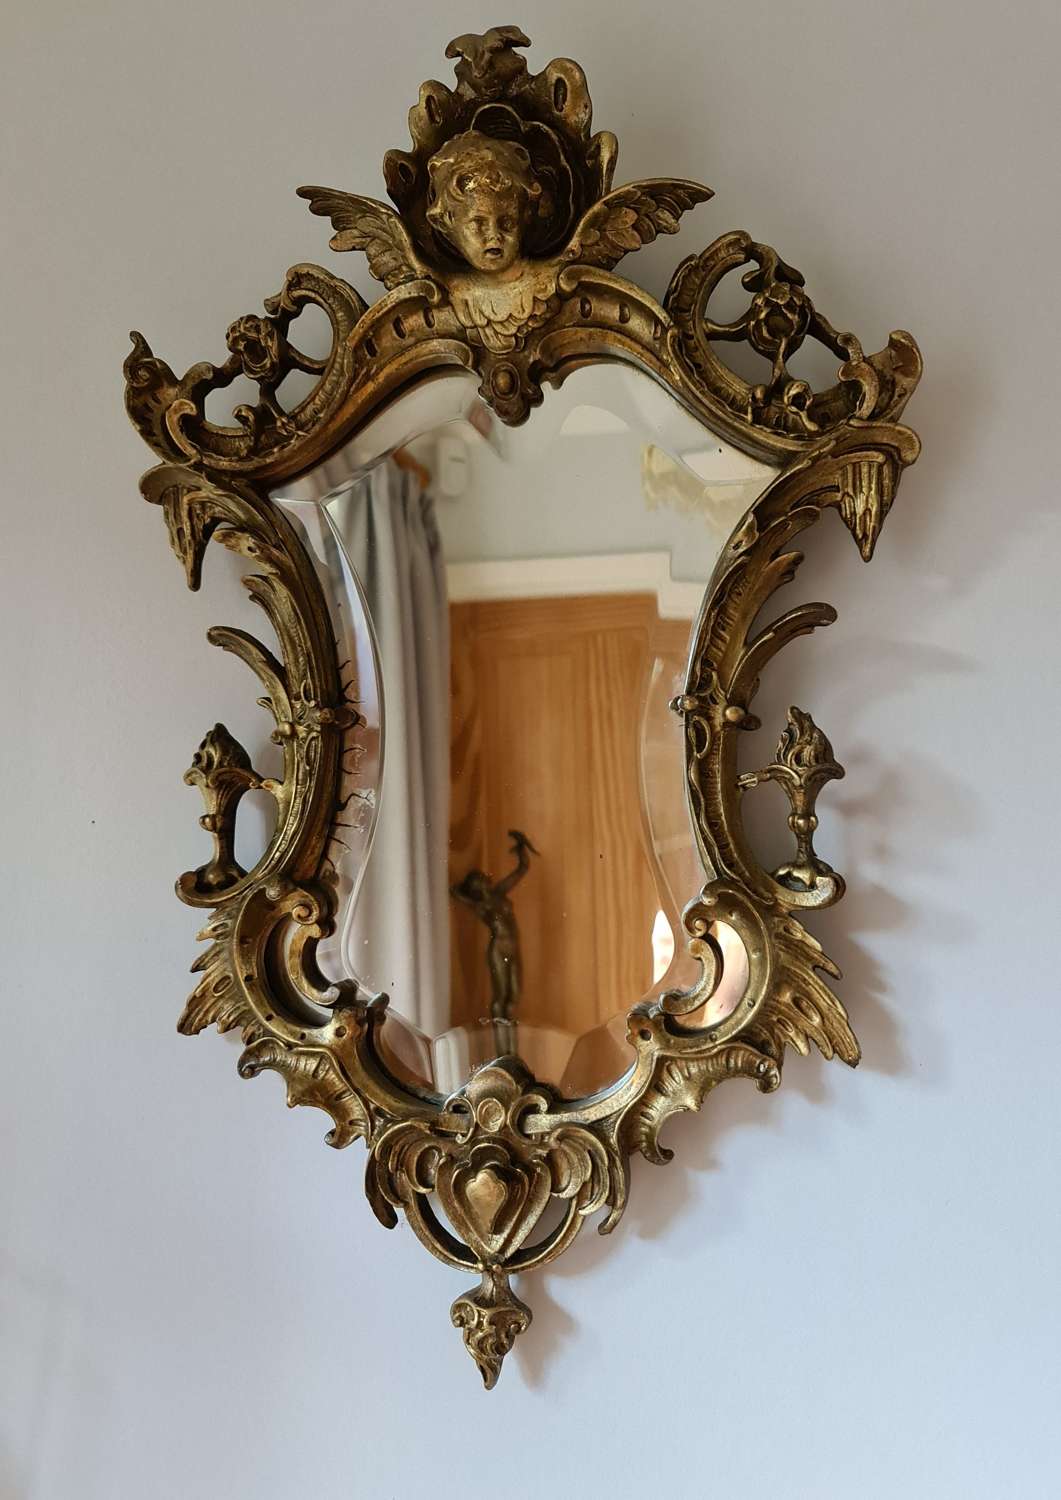 Ornate 19th Century small French Mirror